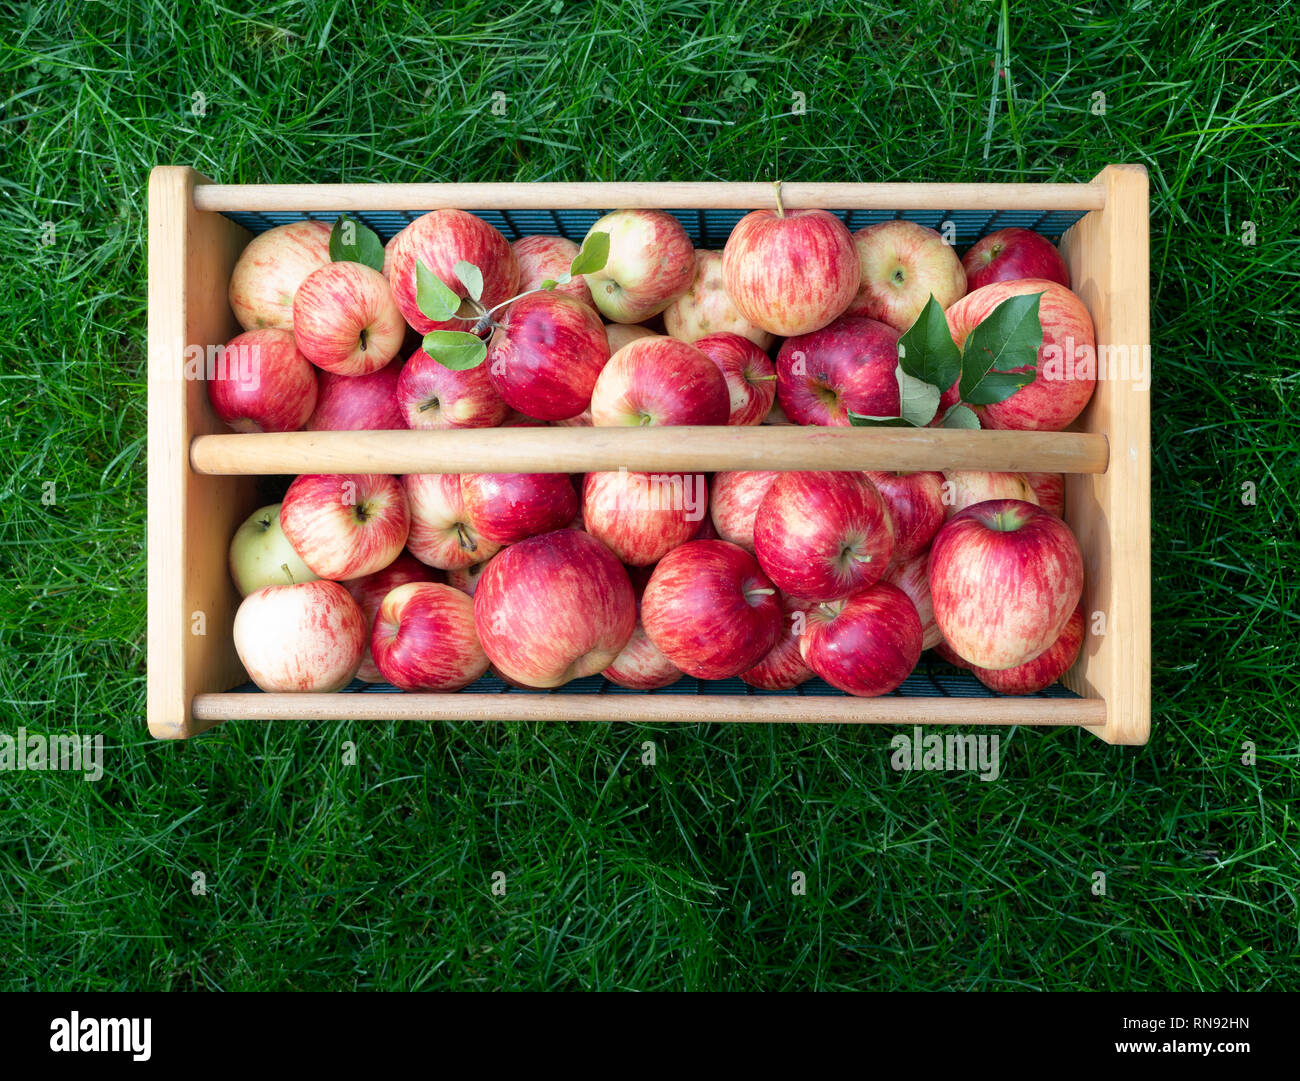 Wood and wire basket with ripe, freshly picked apples sitting on lush green grass. Photographed from above. Stock Photo